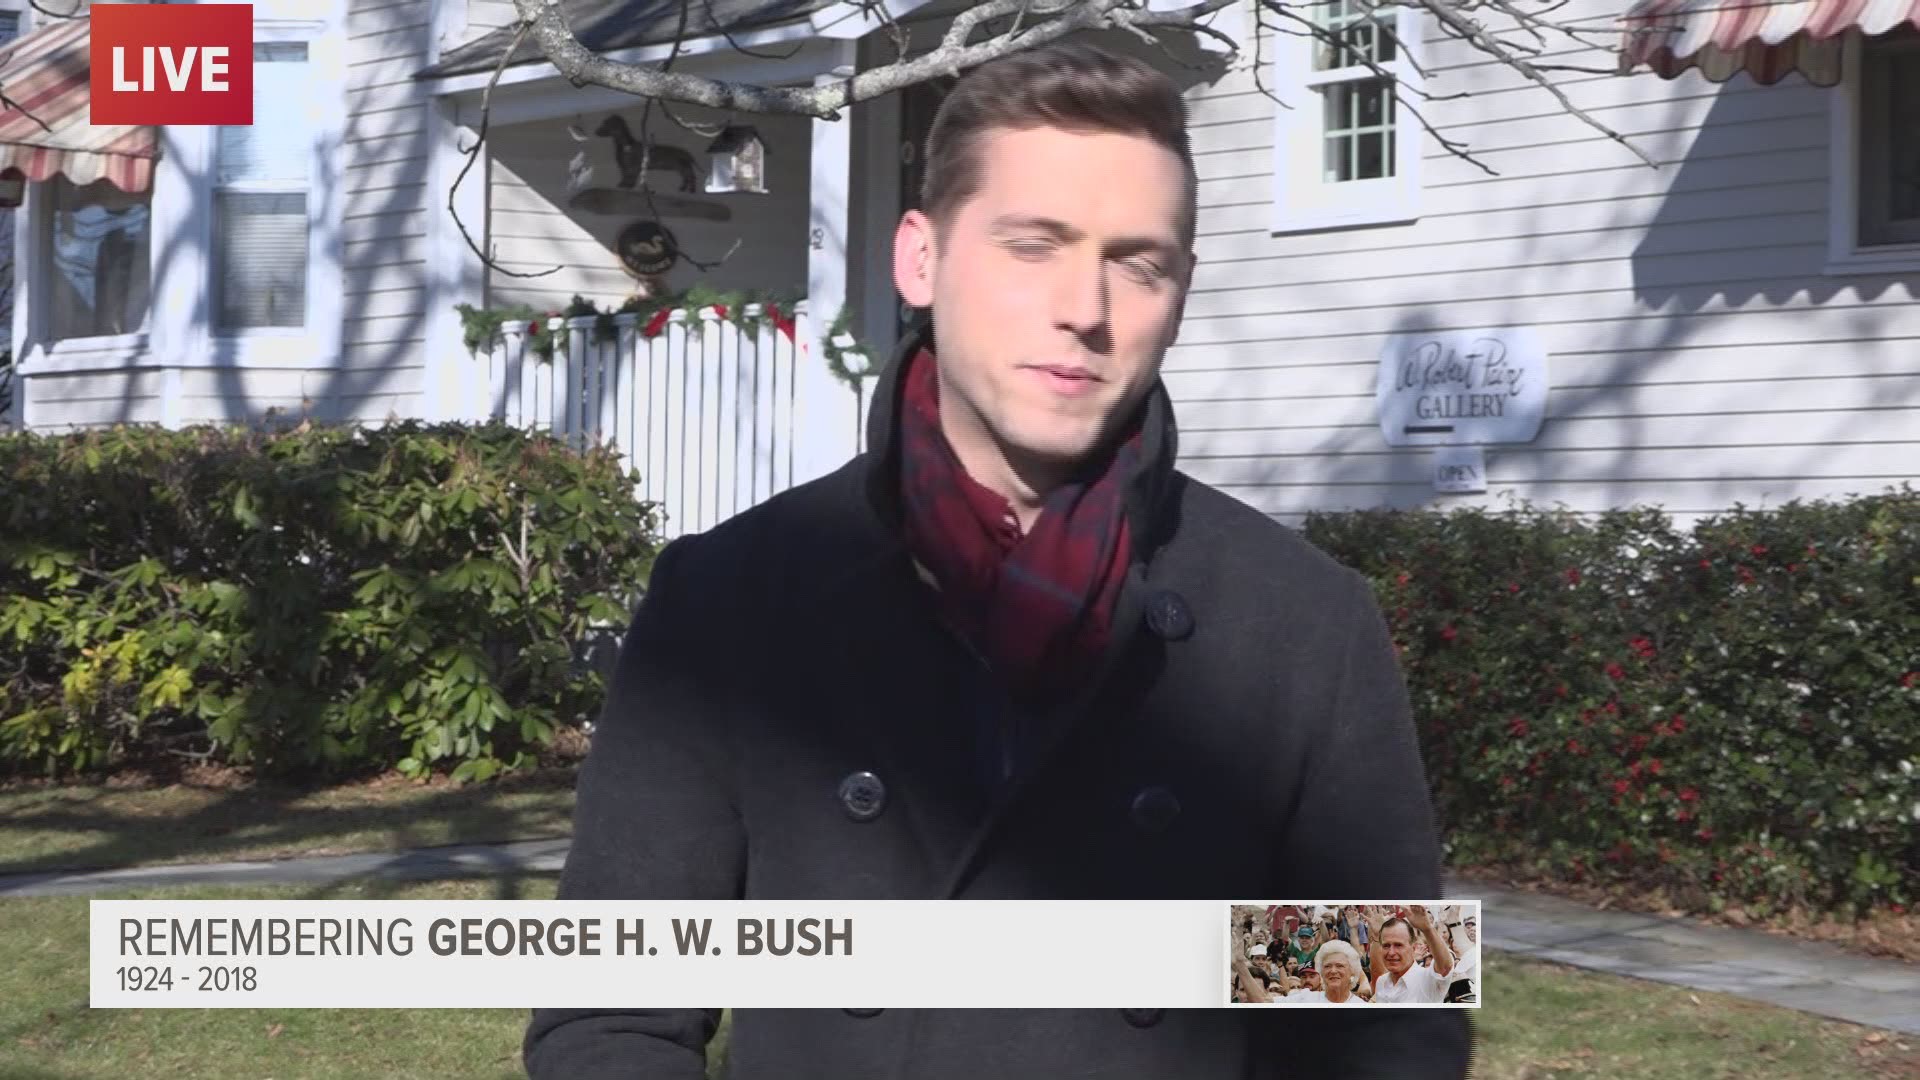 Robert Paine, a longtime Kennebunkport artist, remembers his friend George H.W. Bush